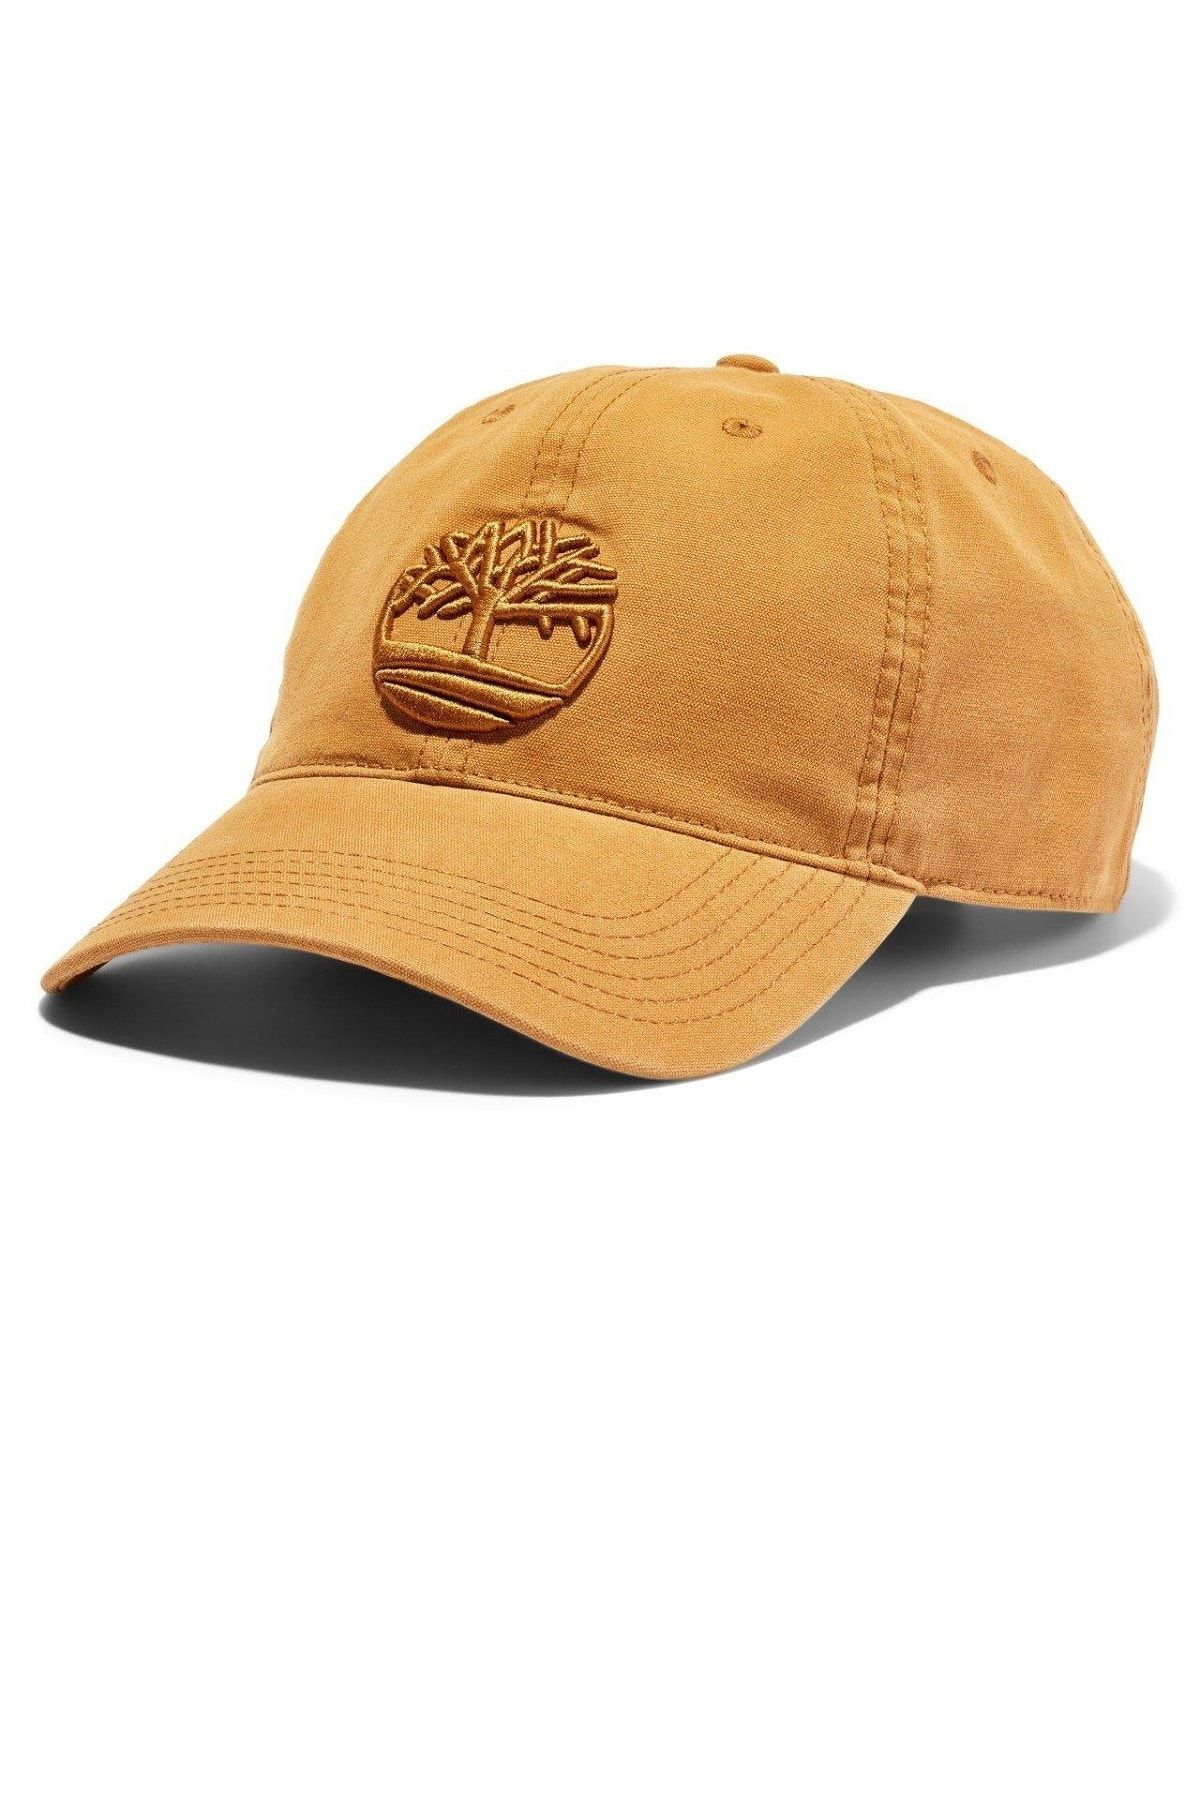 Timberland Cotton Canvas Cap w/Embroider Tree Logo